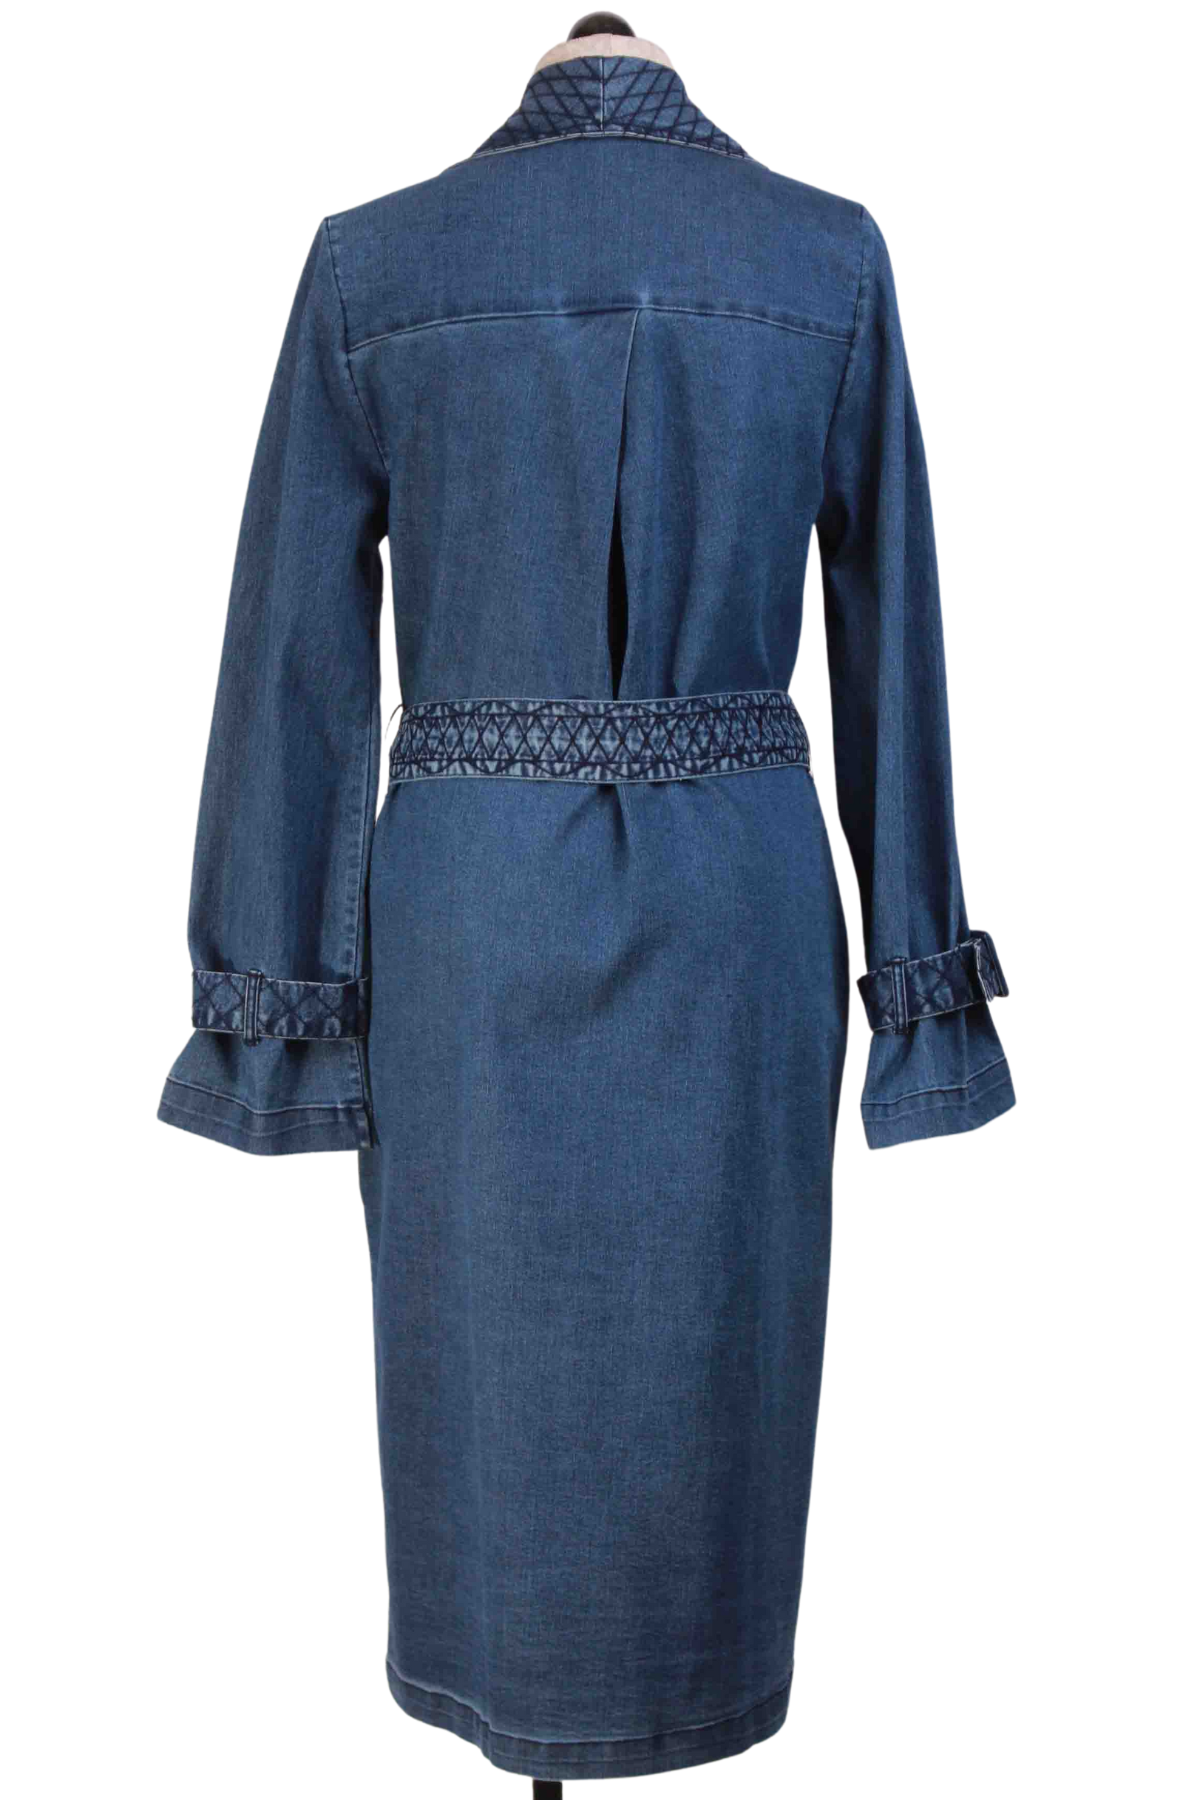 back view of Belted Denim Twill Cara Trench Coat by Cleobella